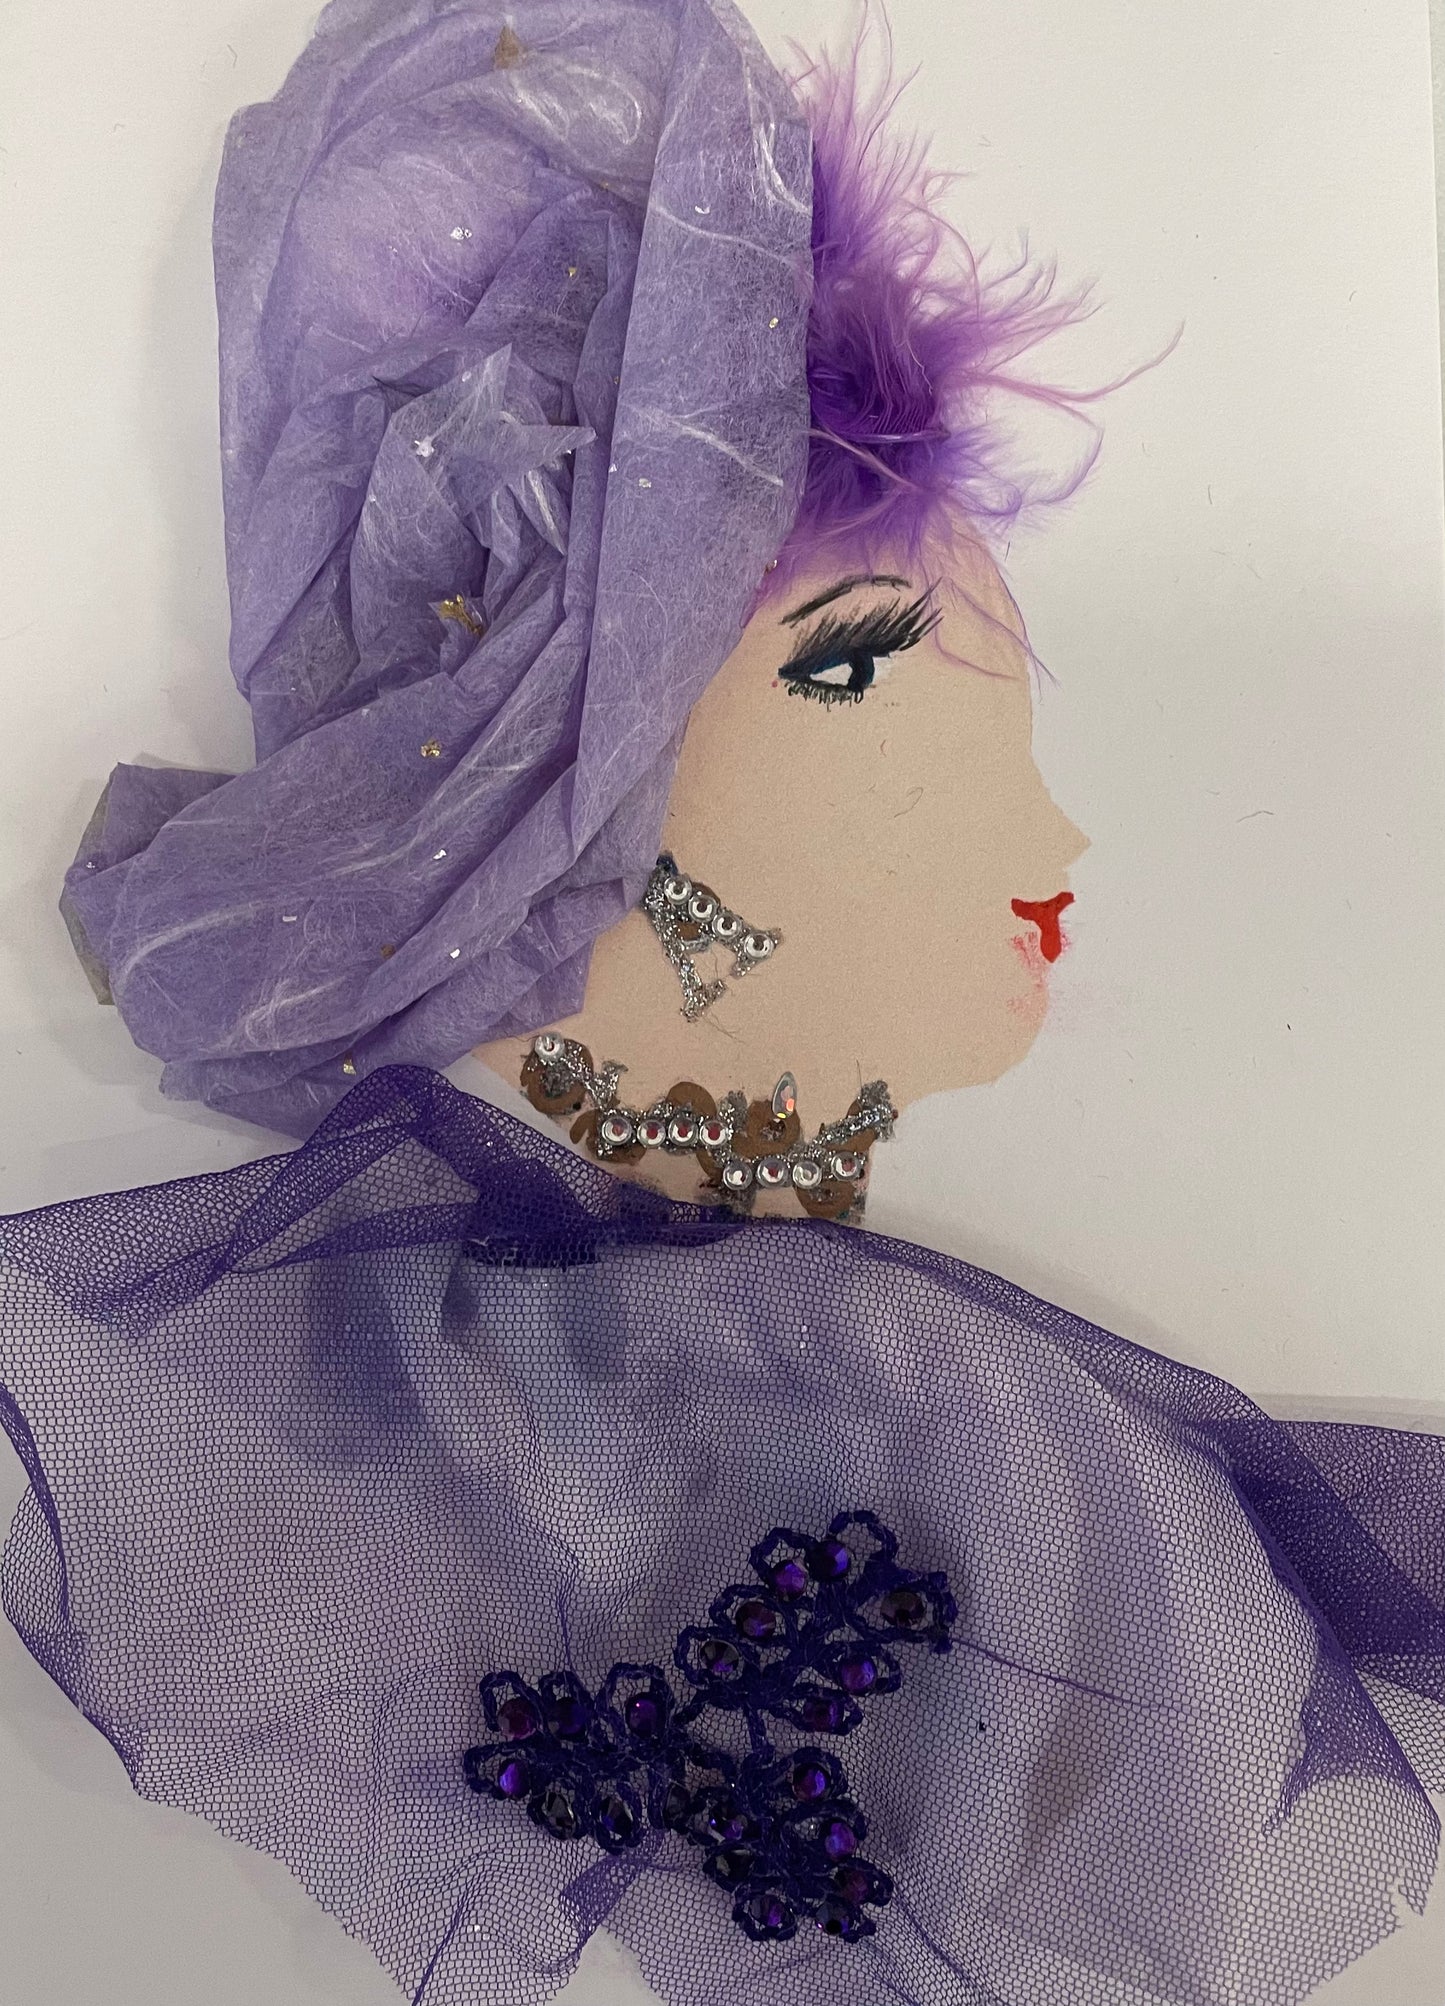 I designed this card of a woman named Hampstead Molly. She has a white skin tone and is wearing a a light purple blouse with a hint of dark purple. There is a dark purple detailing on it as well. She has a light purple headpiece with purple feathers coming out of it as her hair. She has matching silver diamanté earrings.